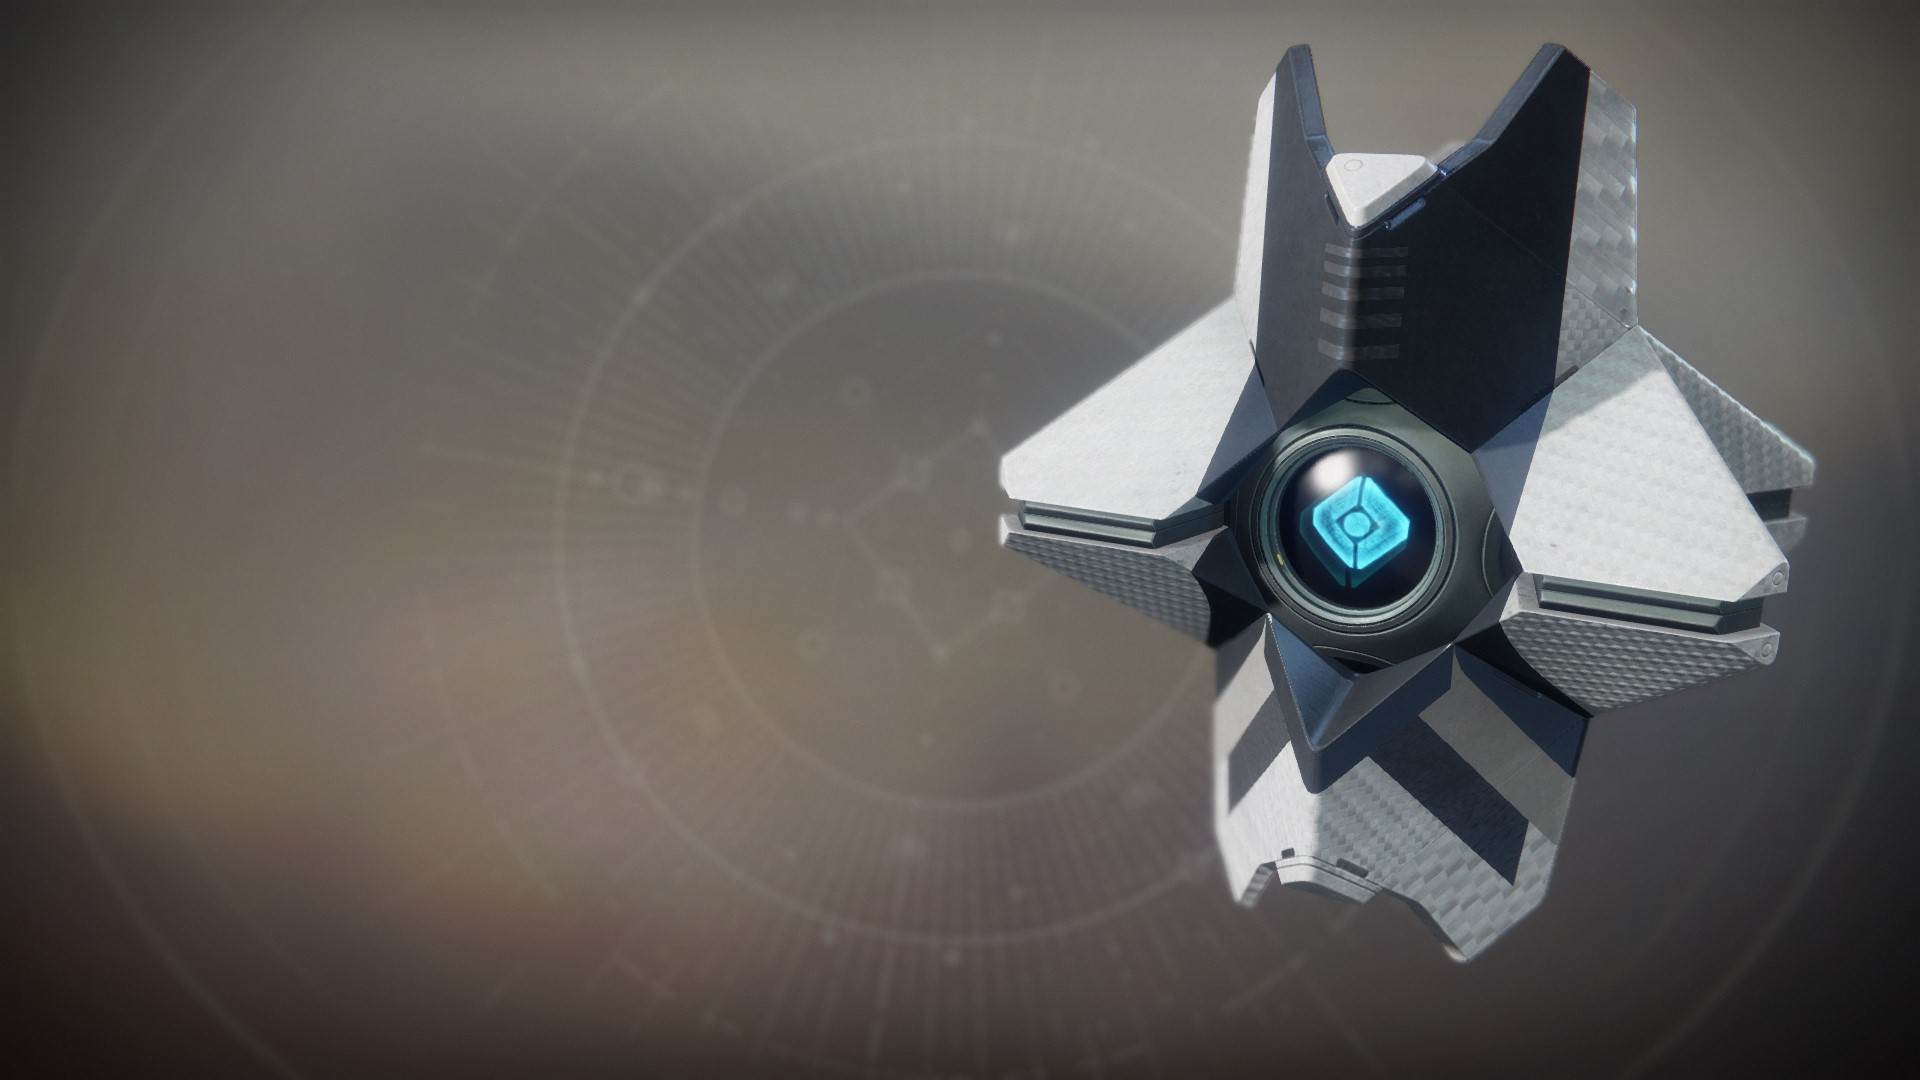 An in-game render of the Graylight Shell.